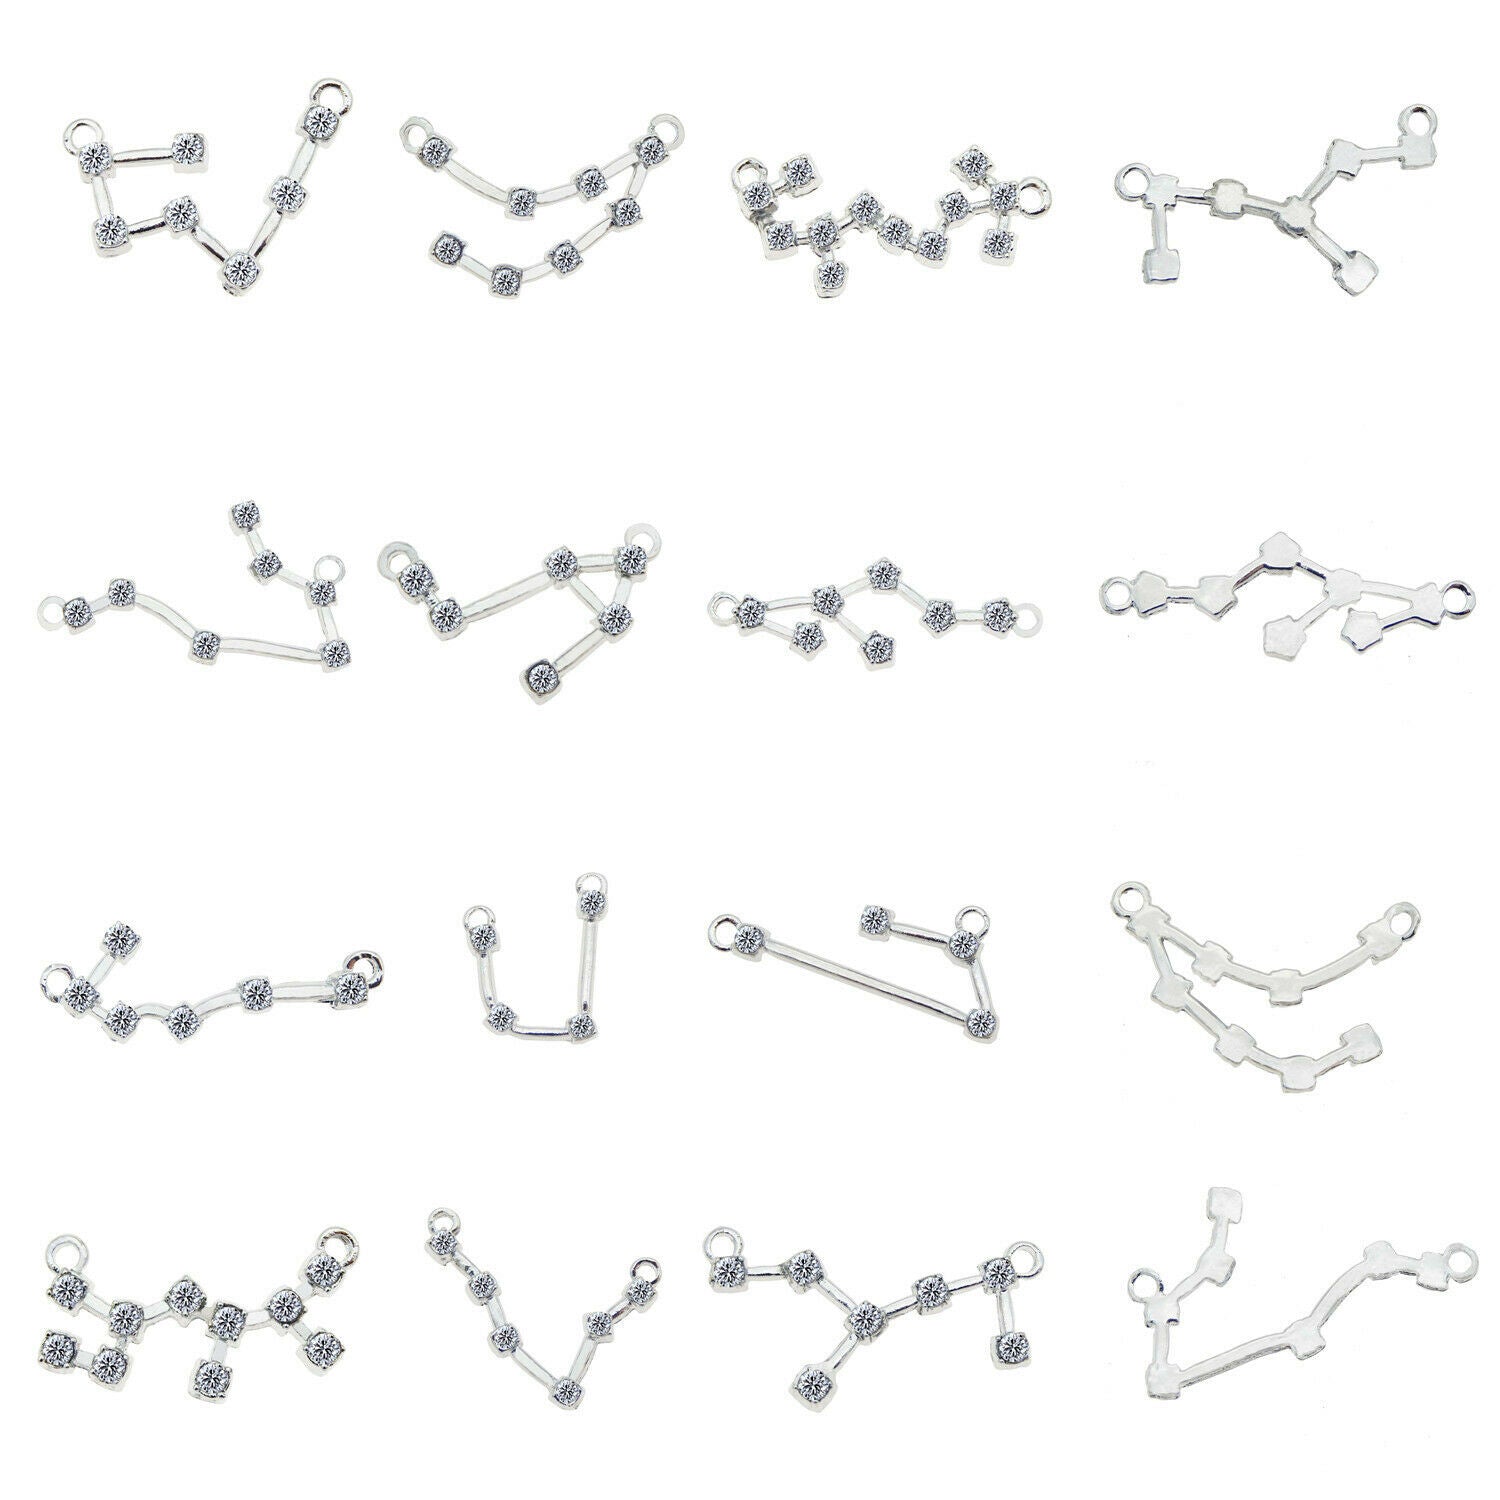 1 set of (x12) White K Alloy Crystal Zodiac Signs Craft Pendant Jewelry Findings